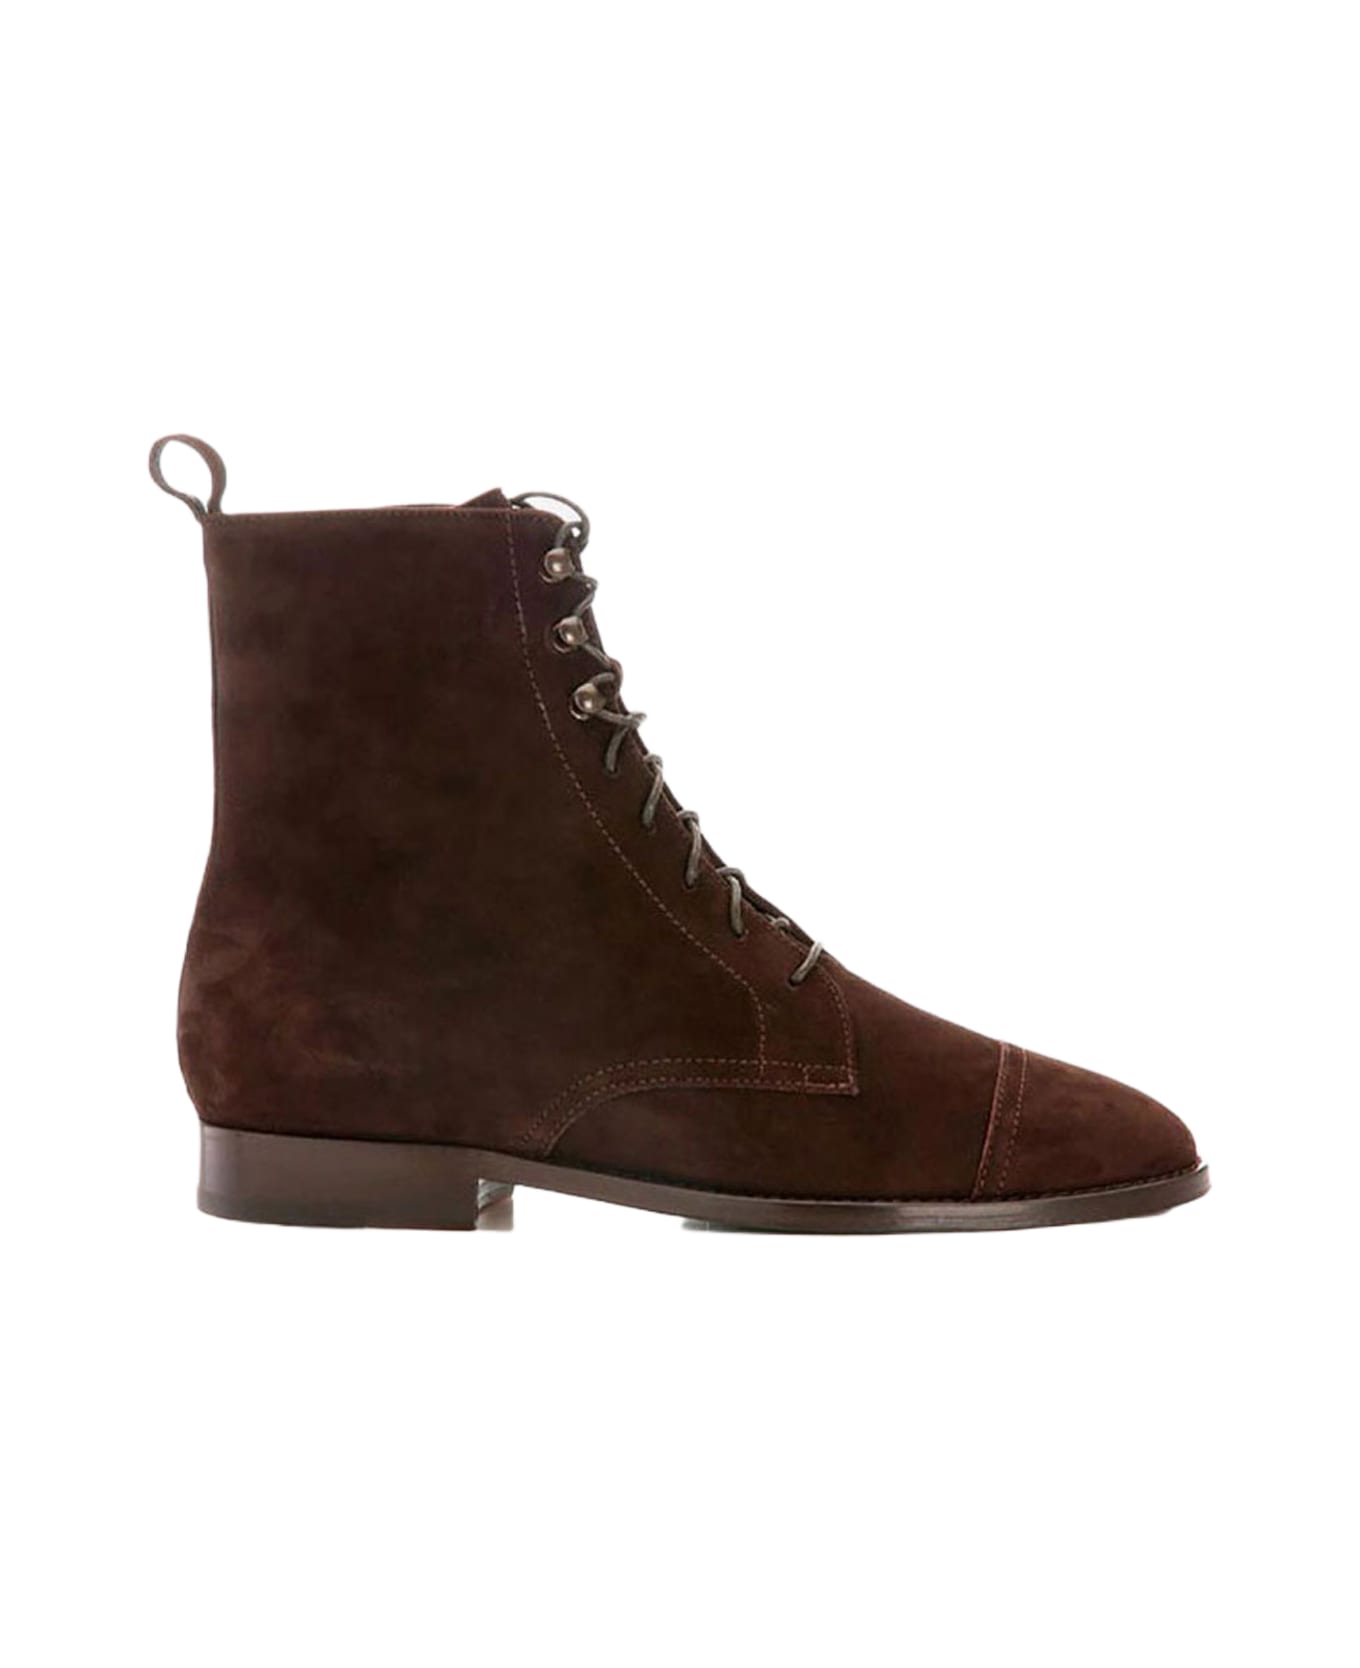 CB Made in Italy Suede Boots Eva - Brown